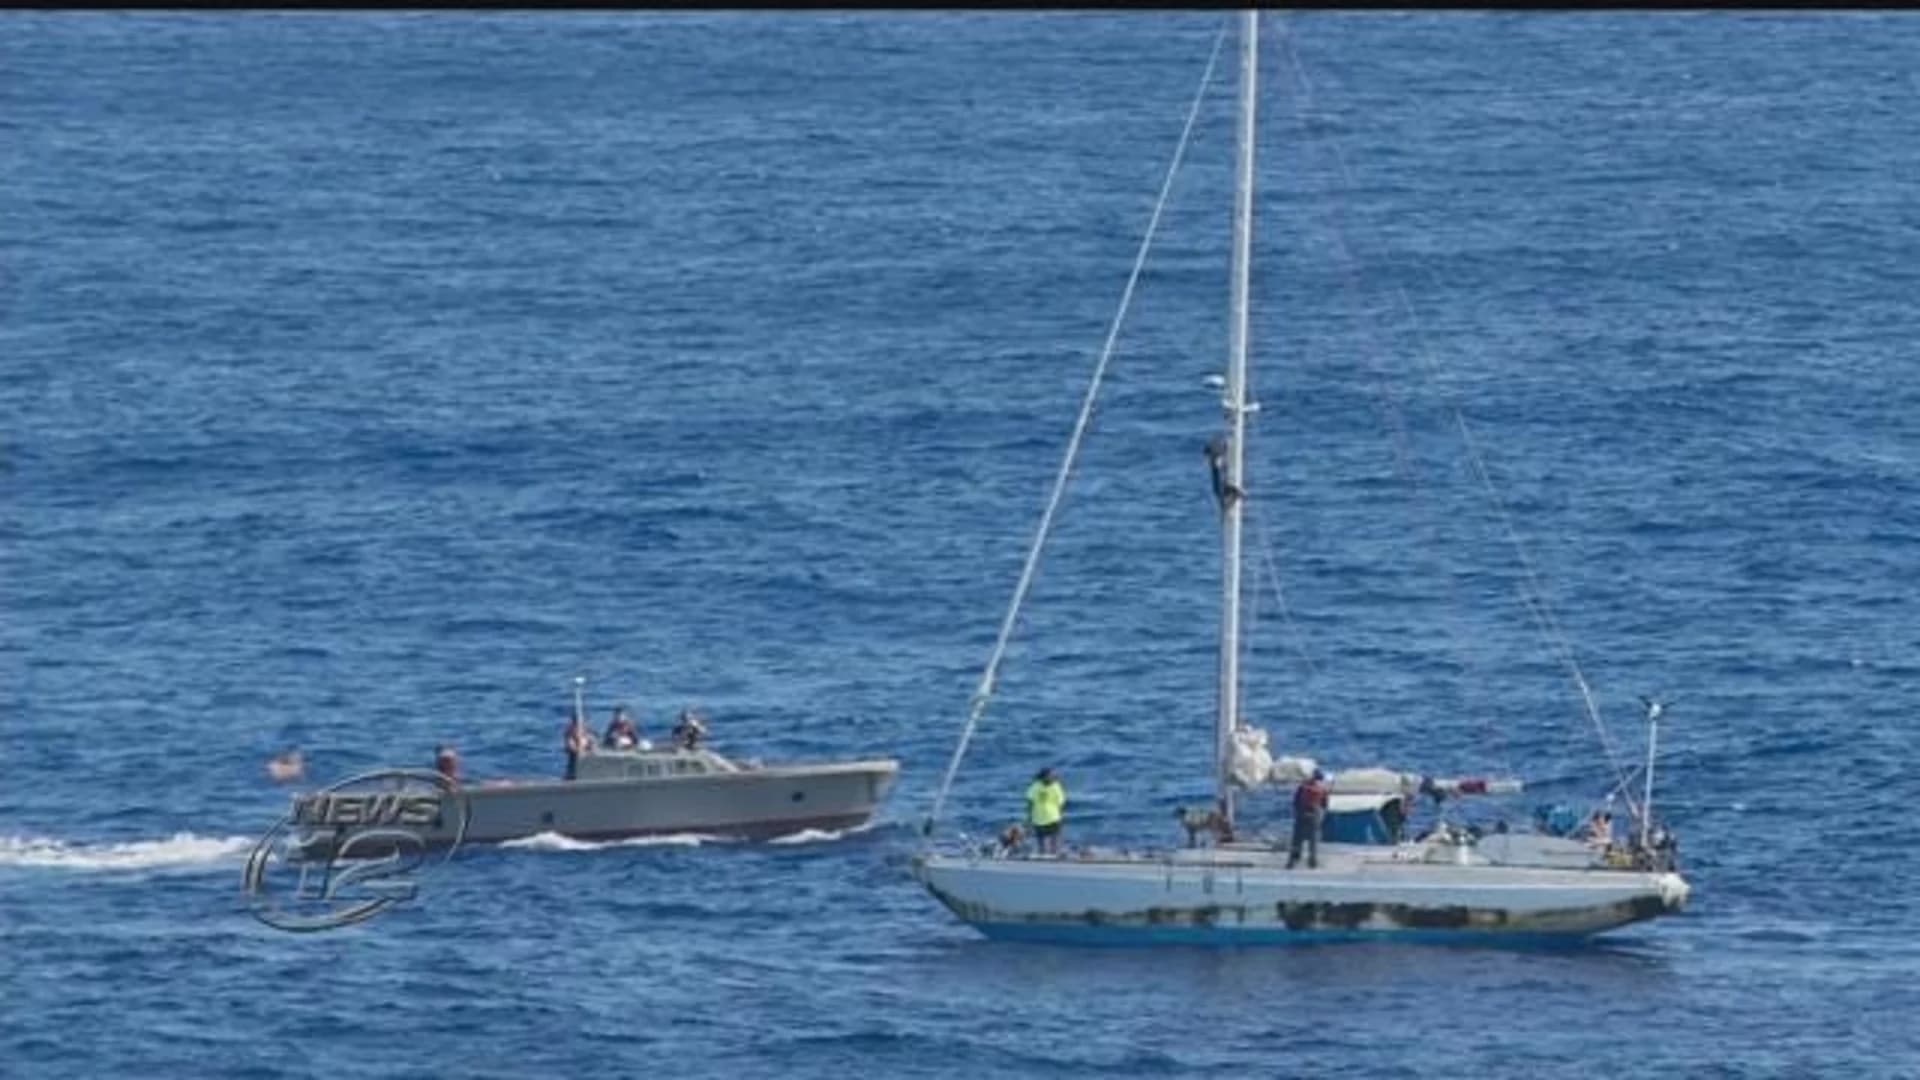 Sharks and lost hope: 2 women rescued after 5 months at sea